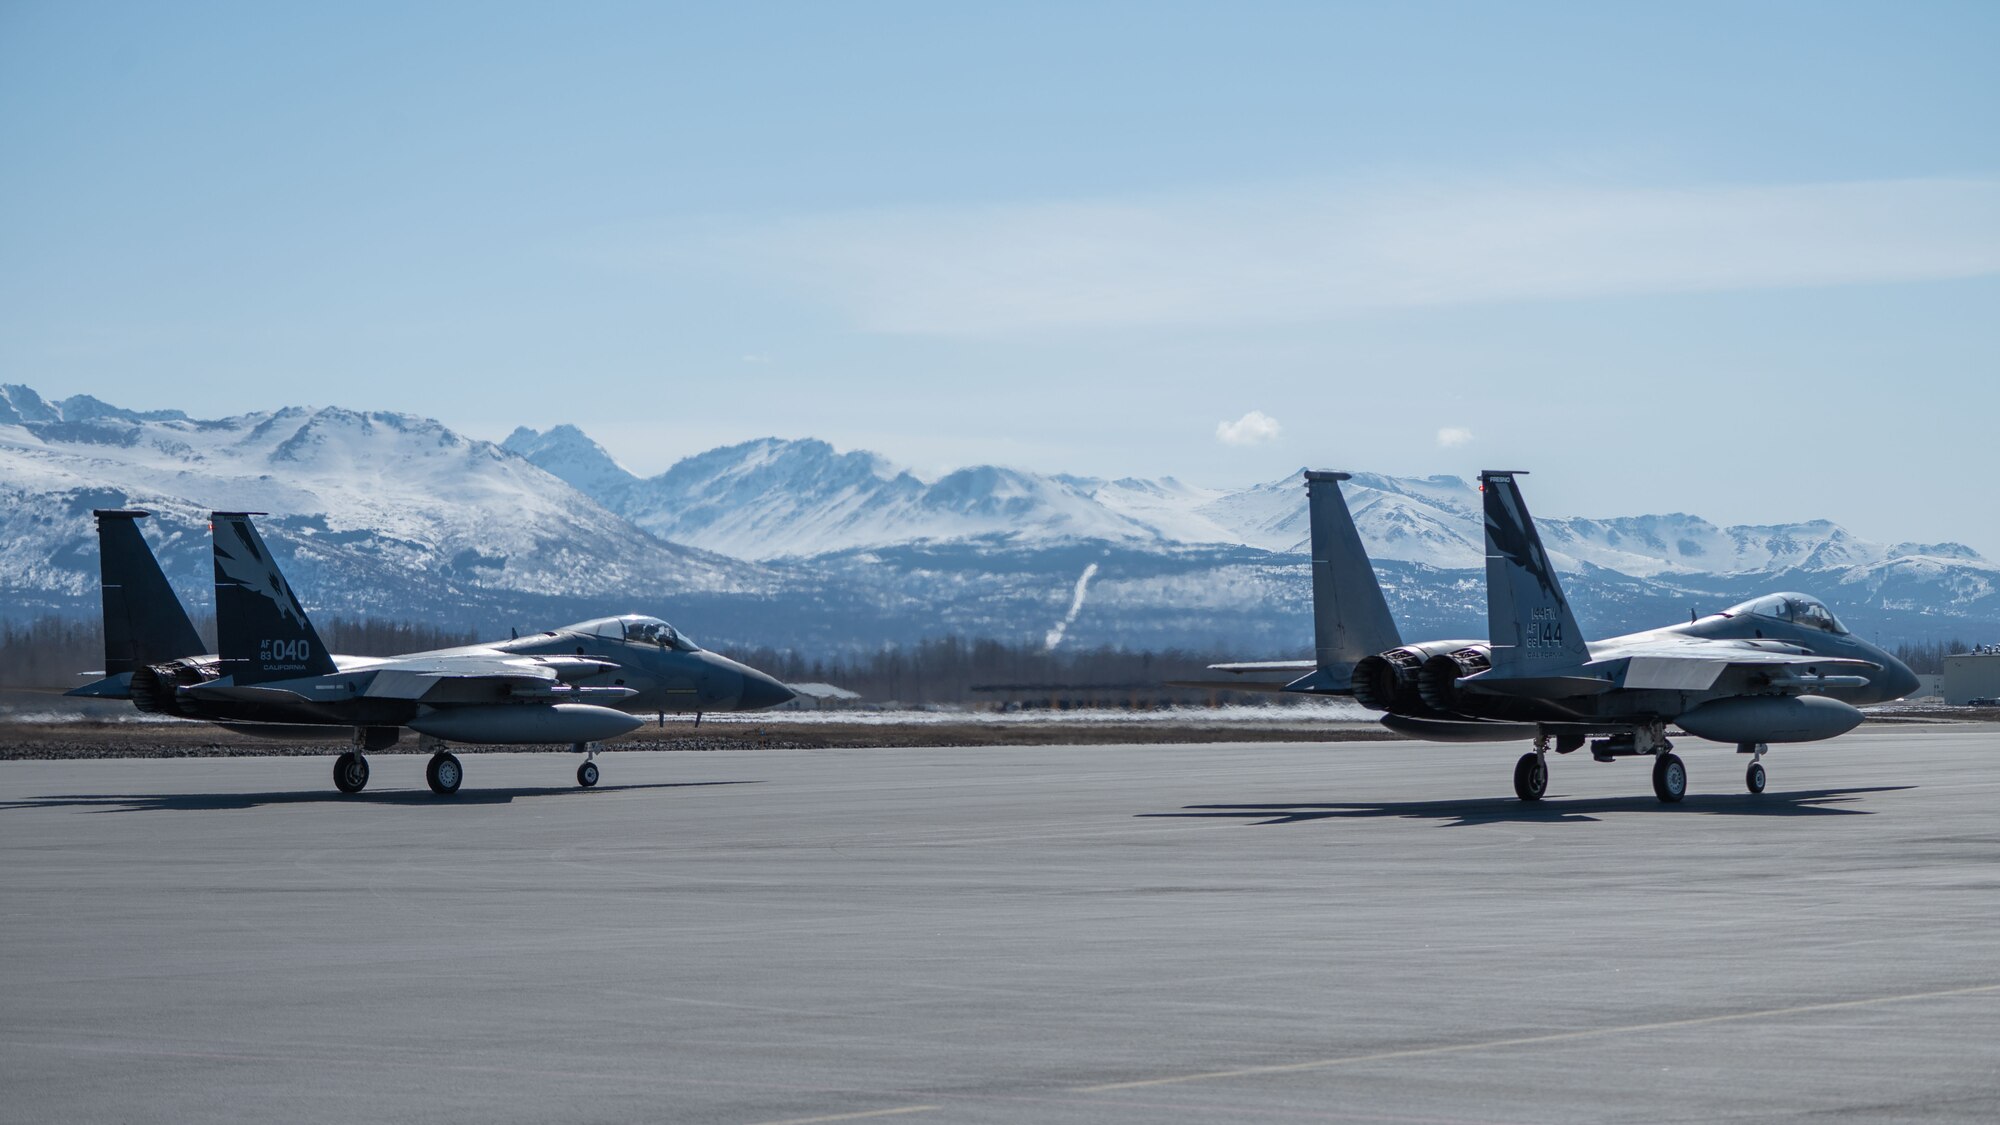 A photo of 2 F-15 Eagles sitting on the flight line.